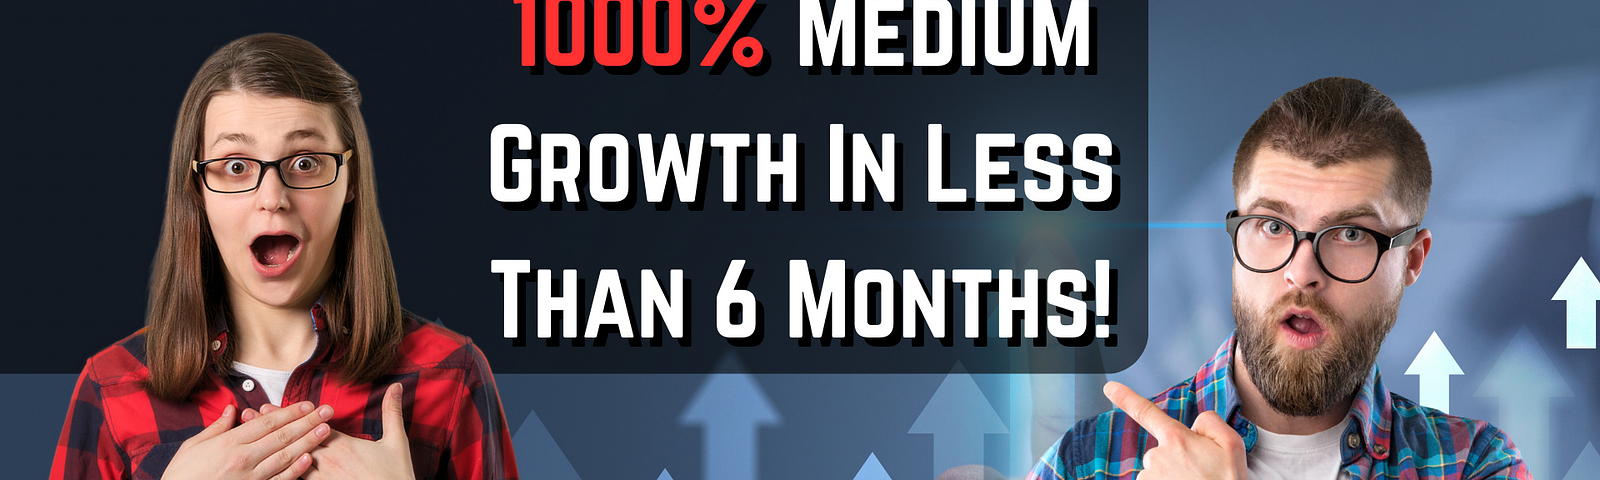 Massive Medium Article Writing Growth Of 1000% In Less Than 6 Months